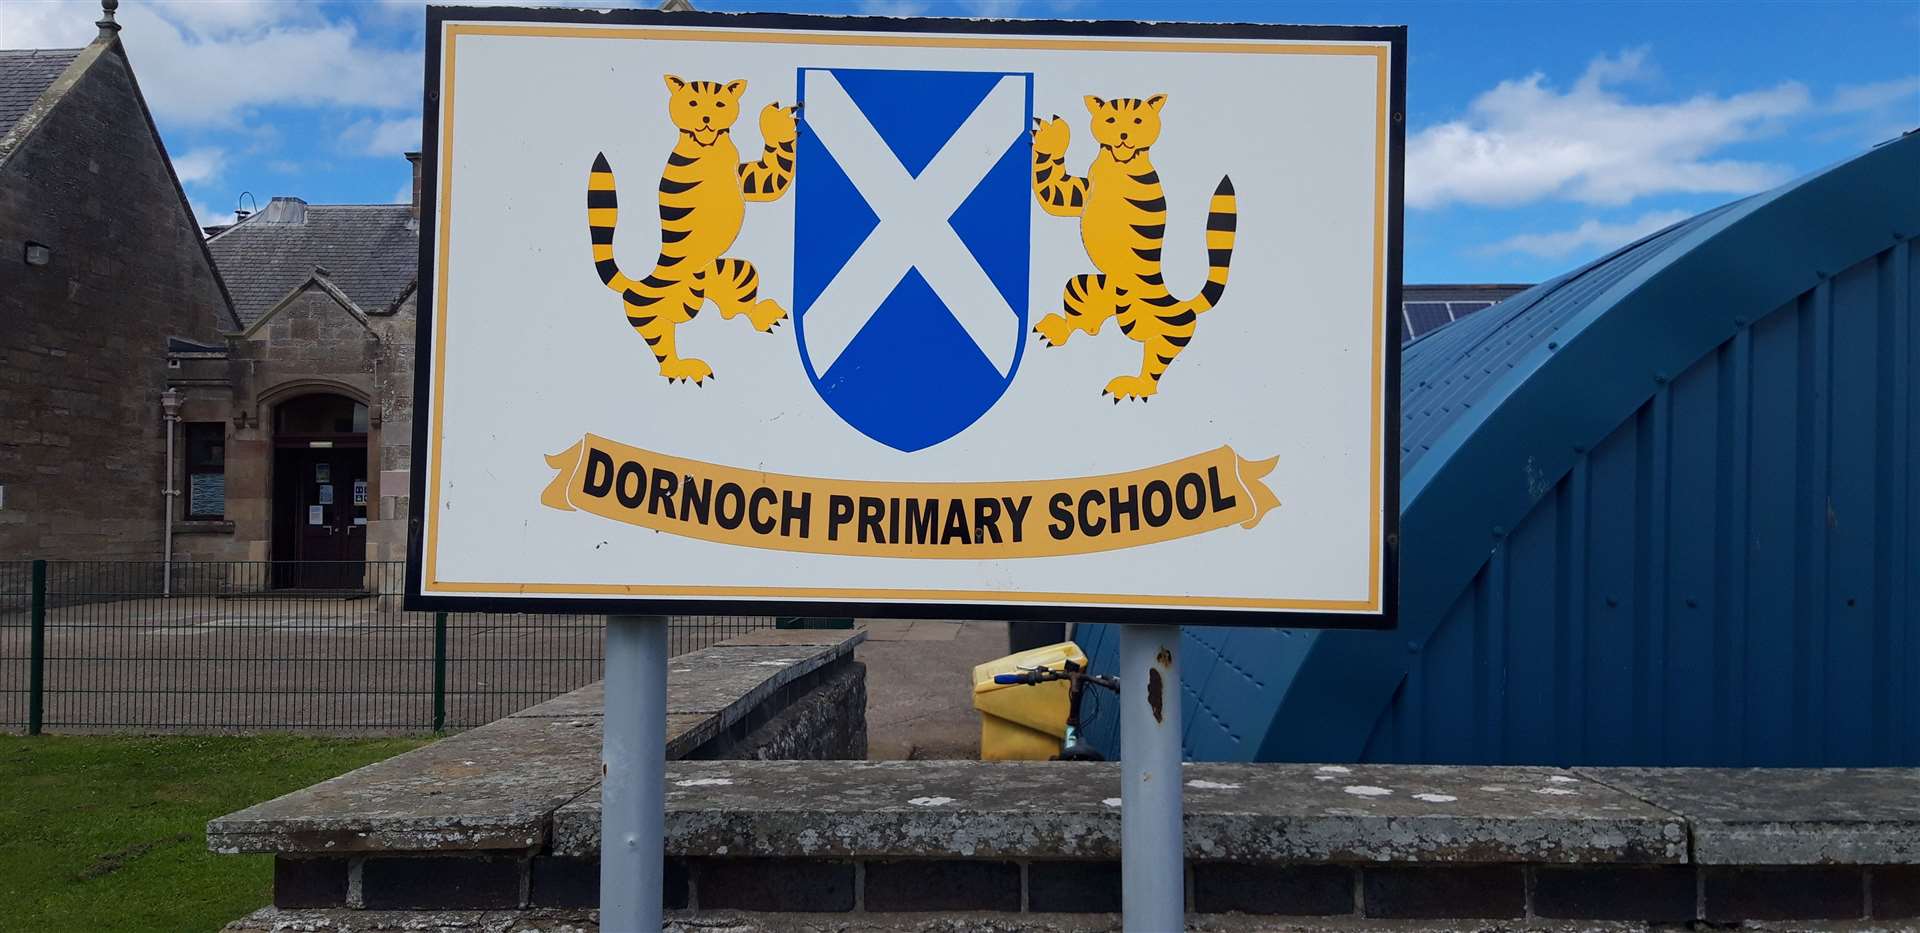 Highland Council says Dornoch Primary School has room for more pupils.